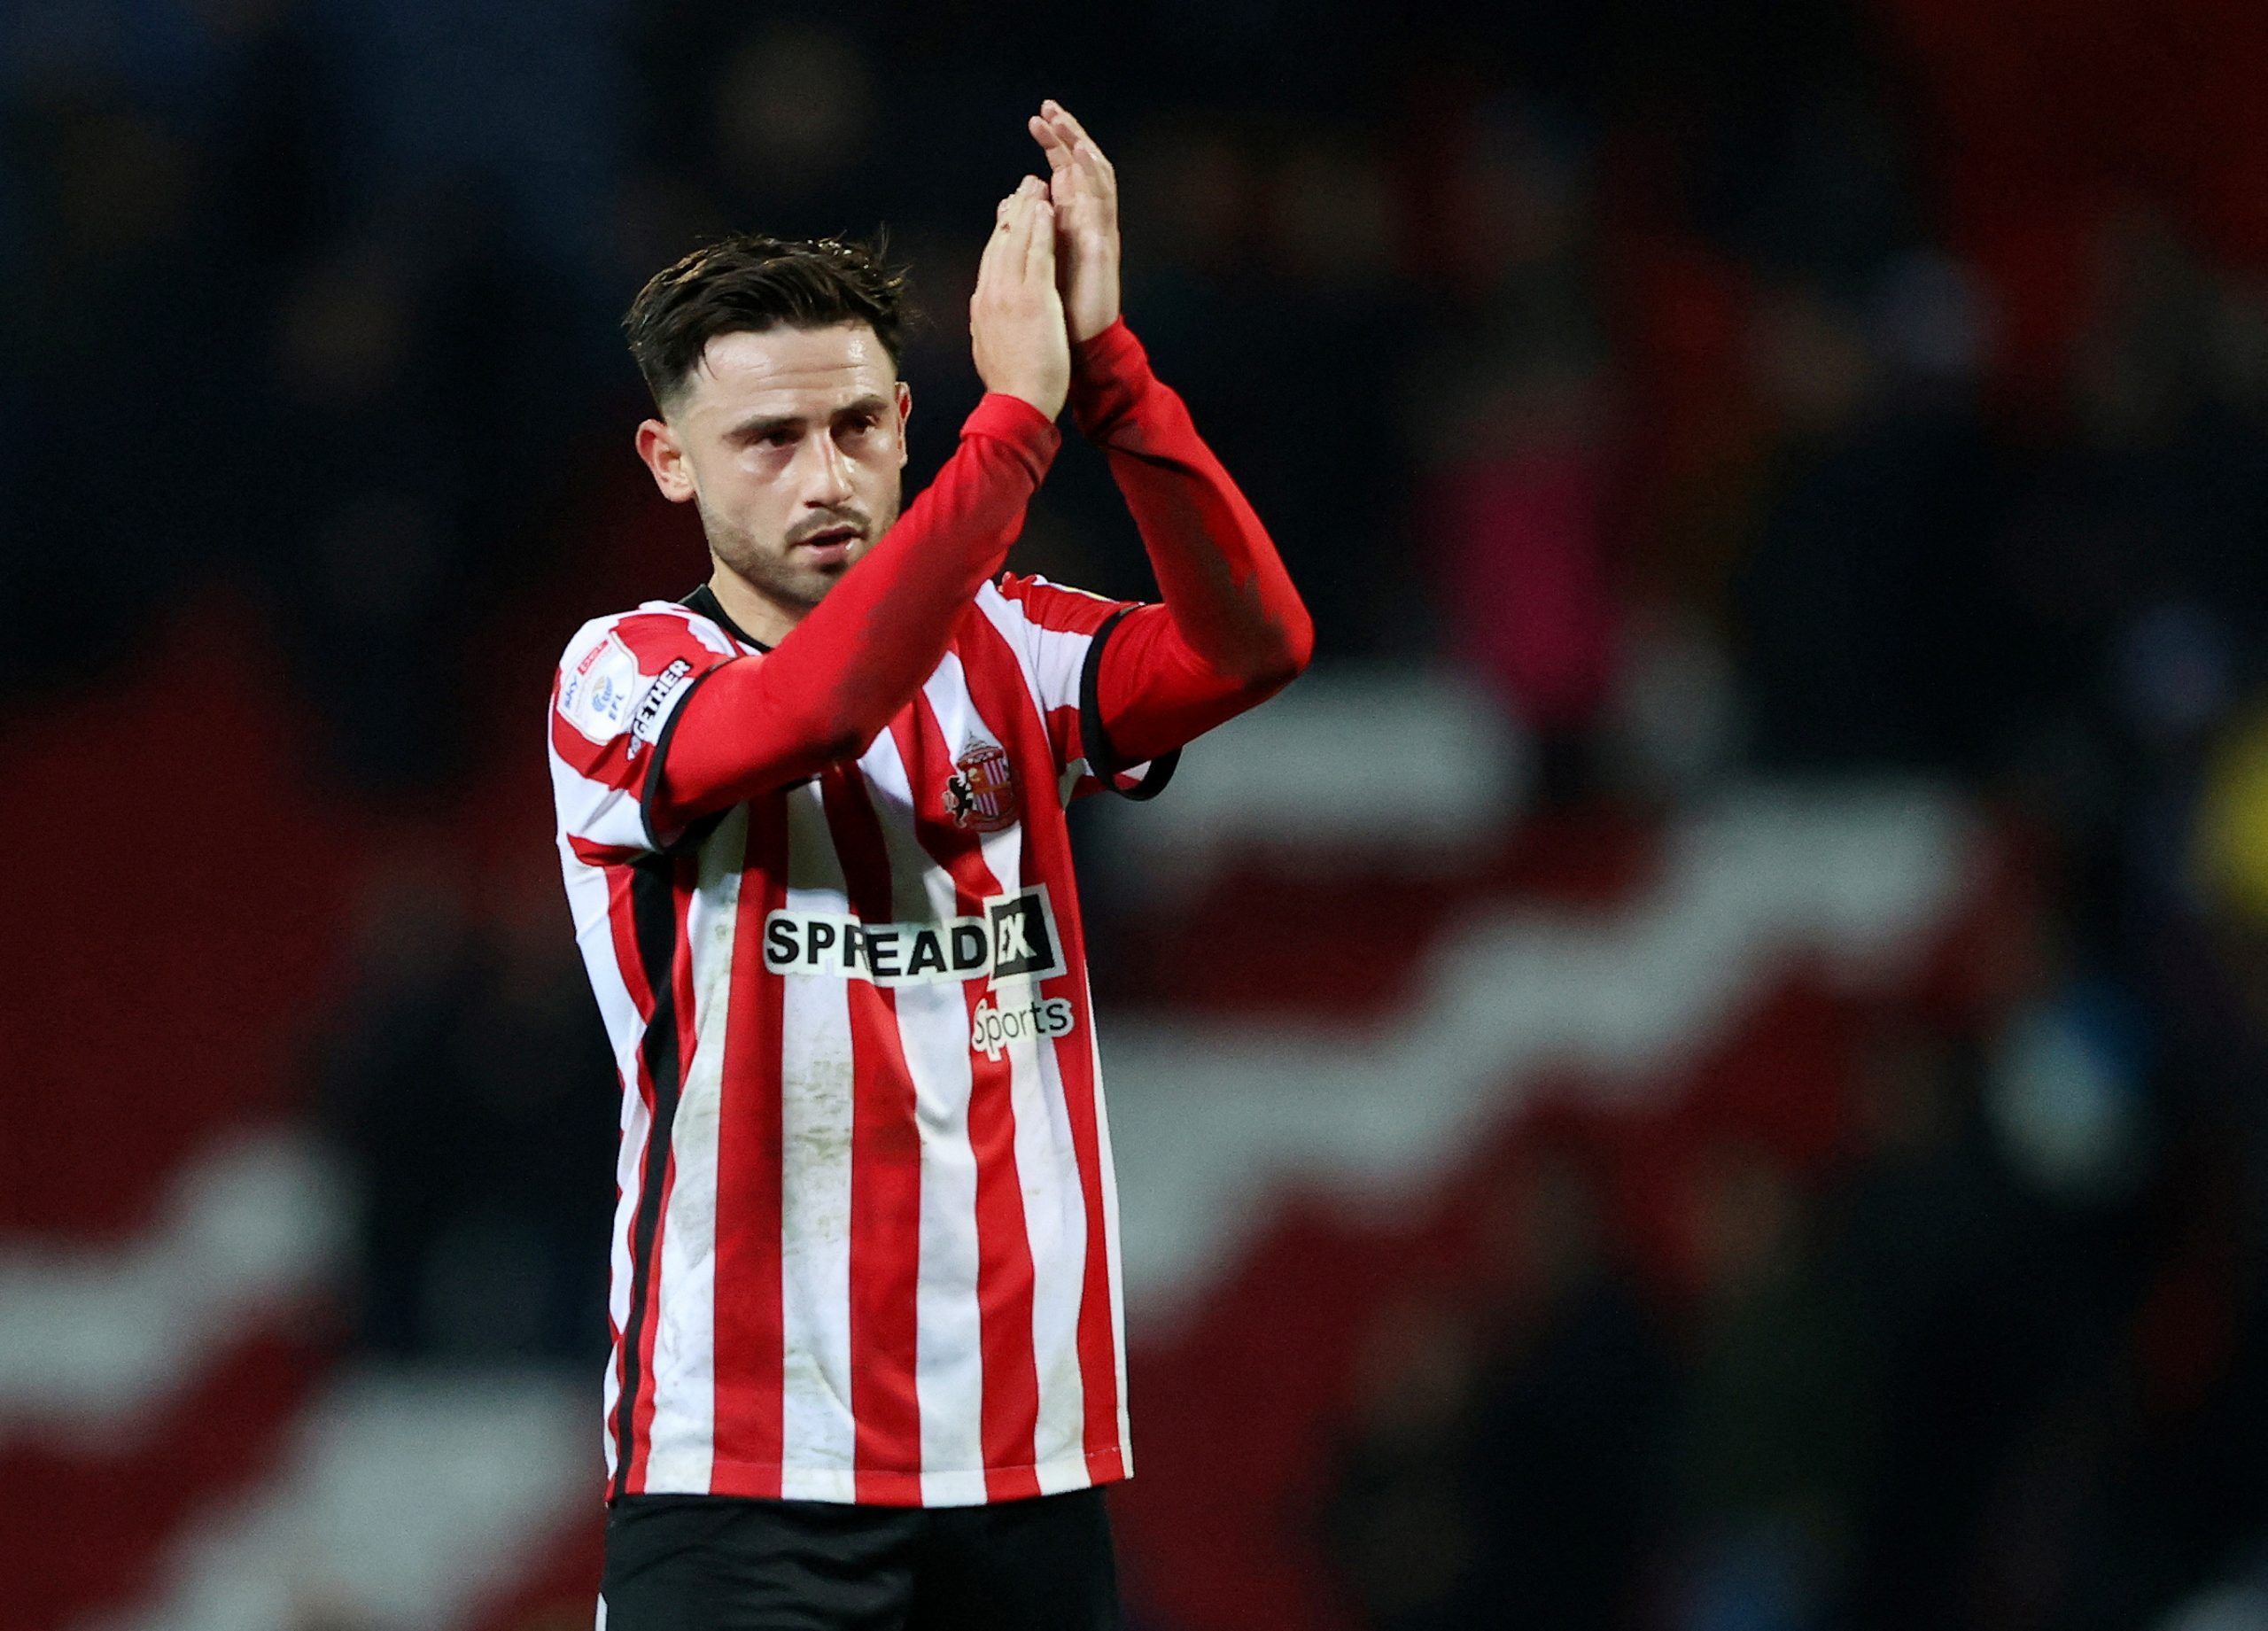 Sunderland: Patrick Roberts could travel with squad after injury -Sunderland News